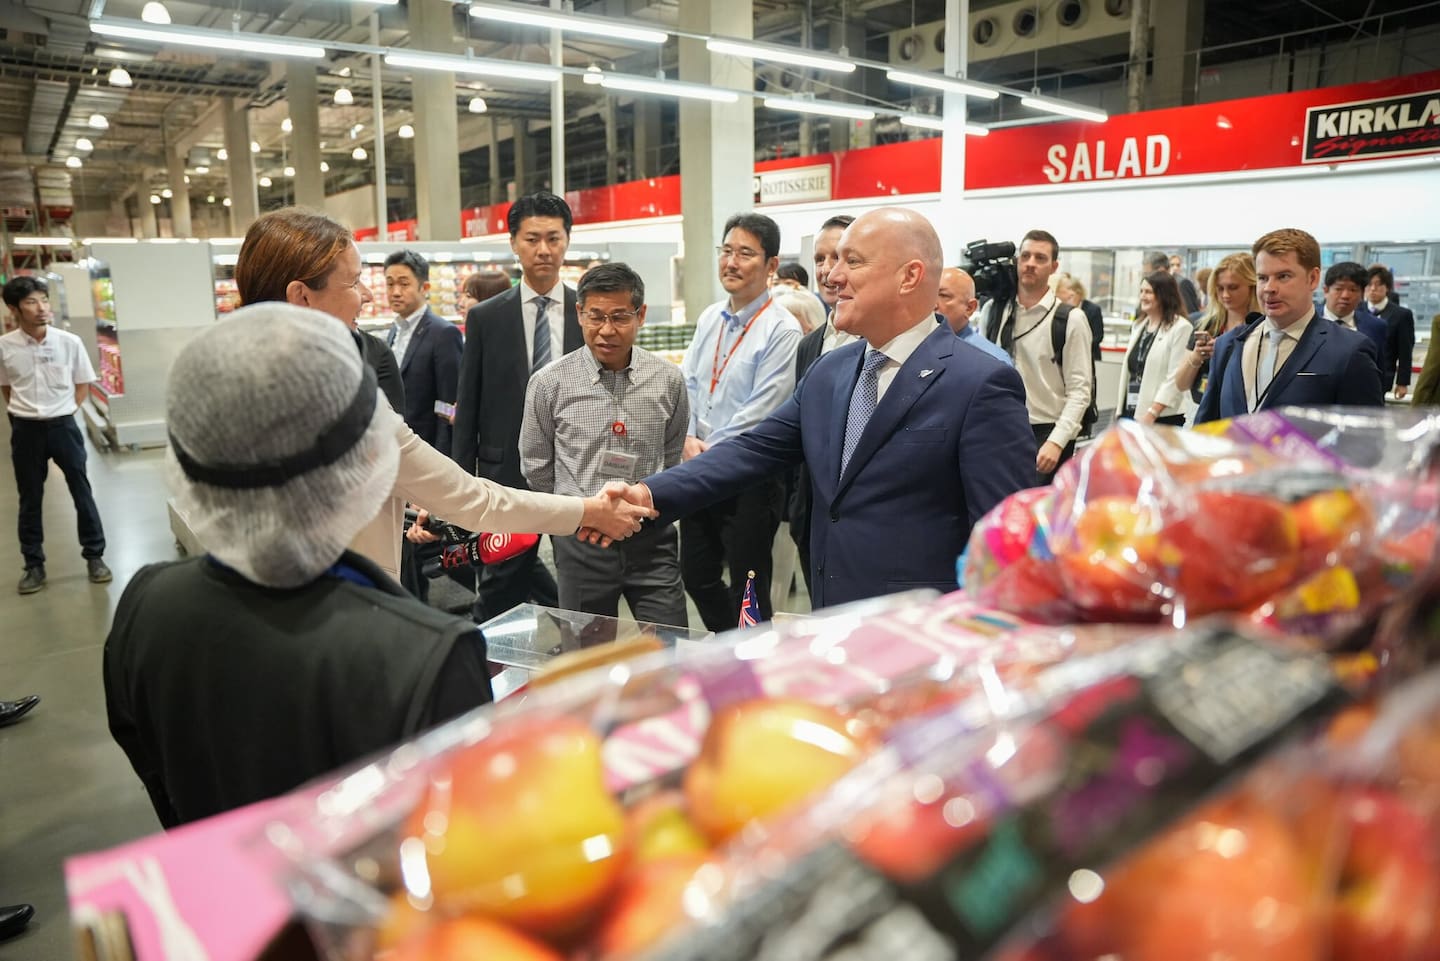 Prime Minister Christopher Luxon meets with Japanese buyers and New Zealand producers at a Costco supermarket in Tokyo.